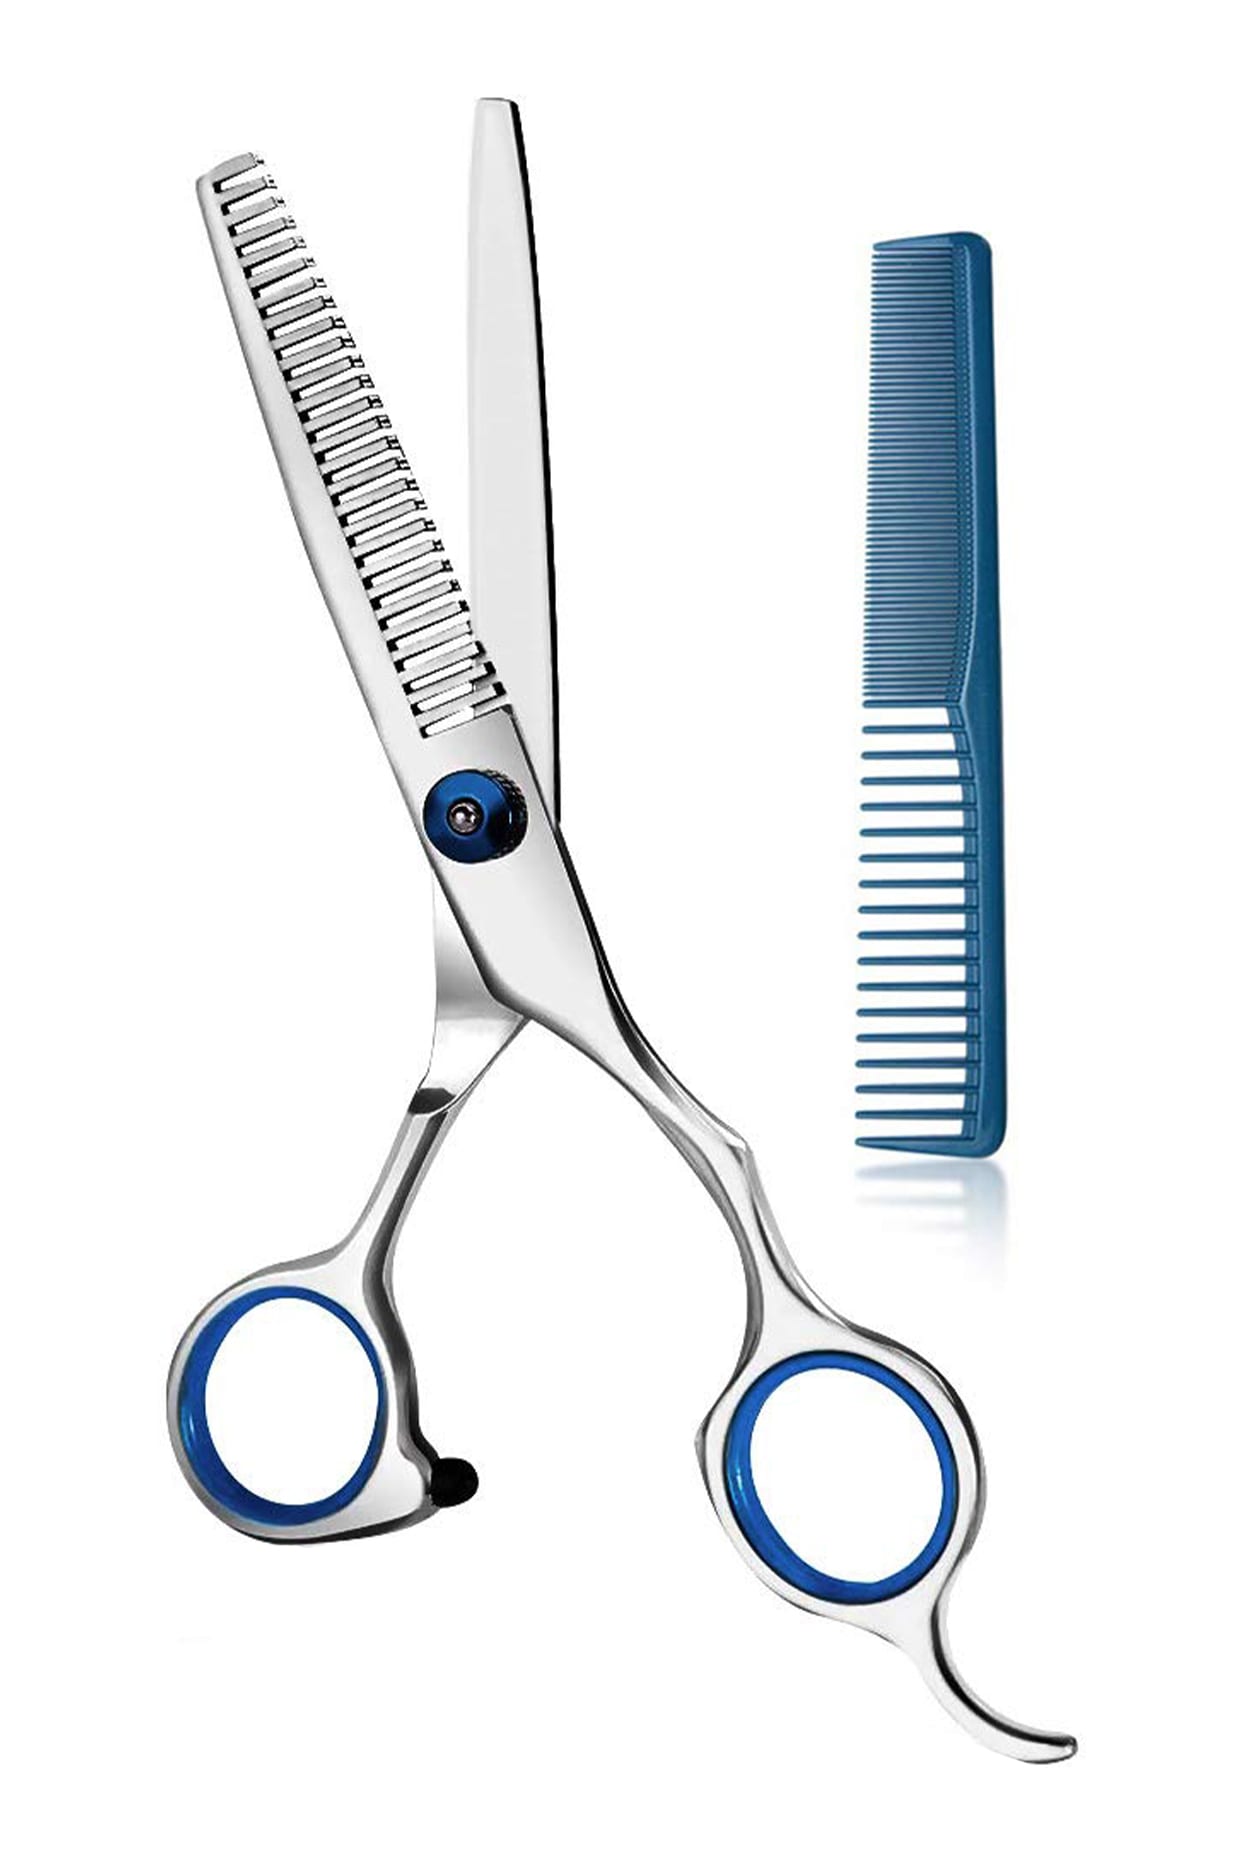 Stainless steel thinning shears and a blue comb.